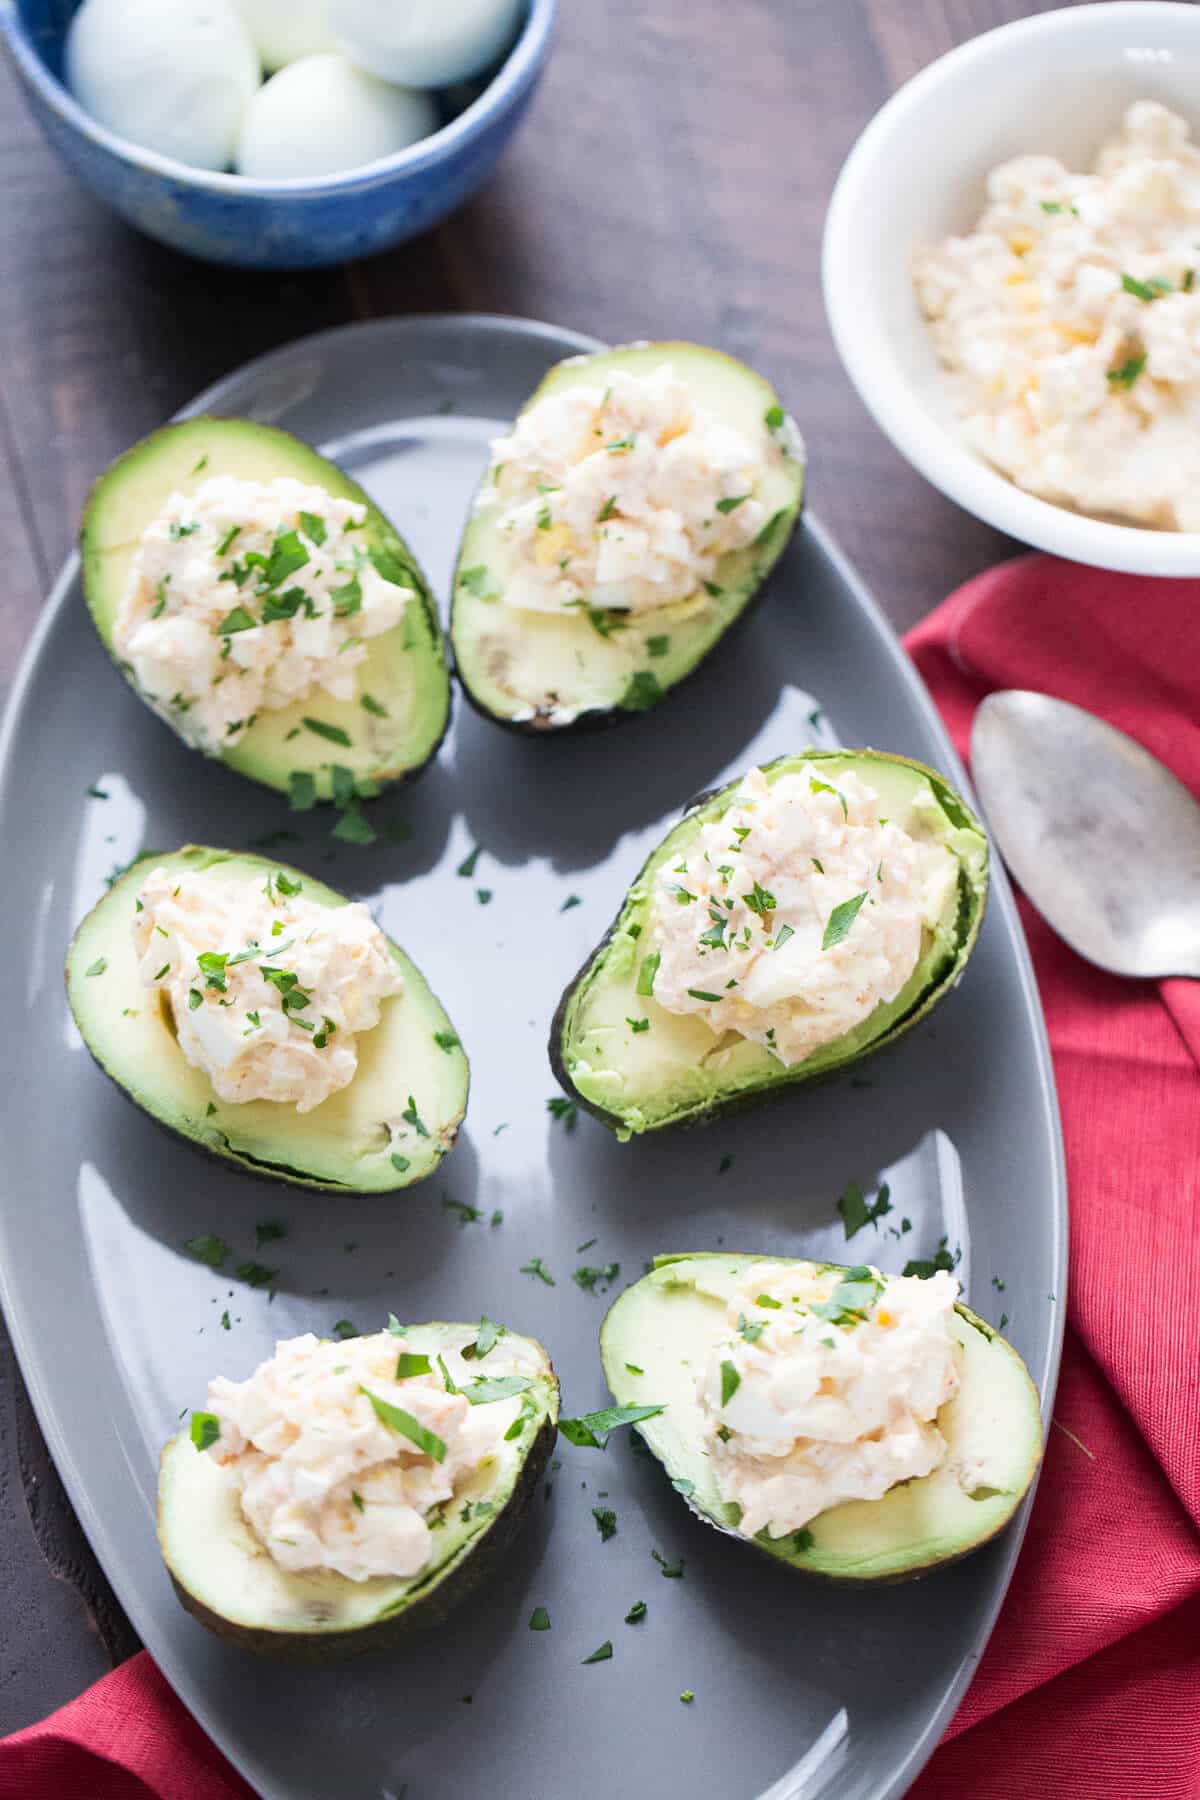 Deviled egg avocados will be taking the place of deviled eggs! This is a whole new way to enjoy avocados!